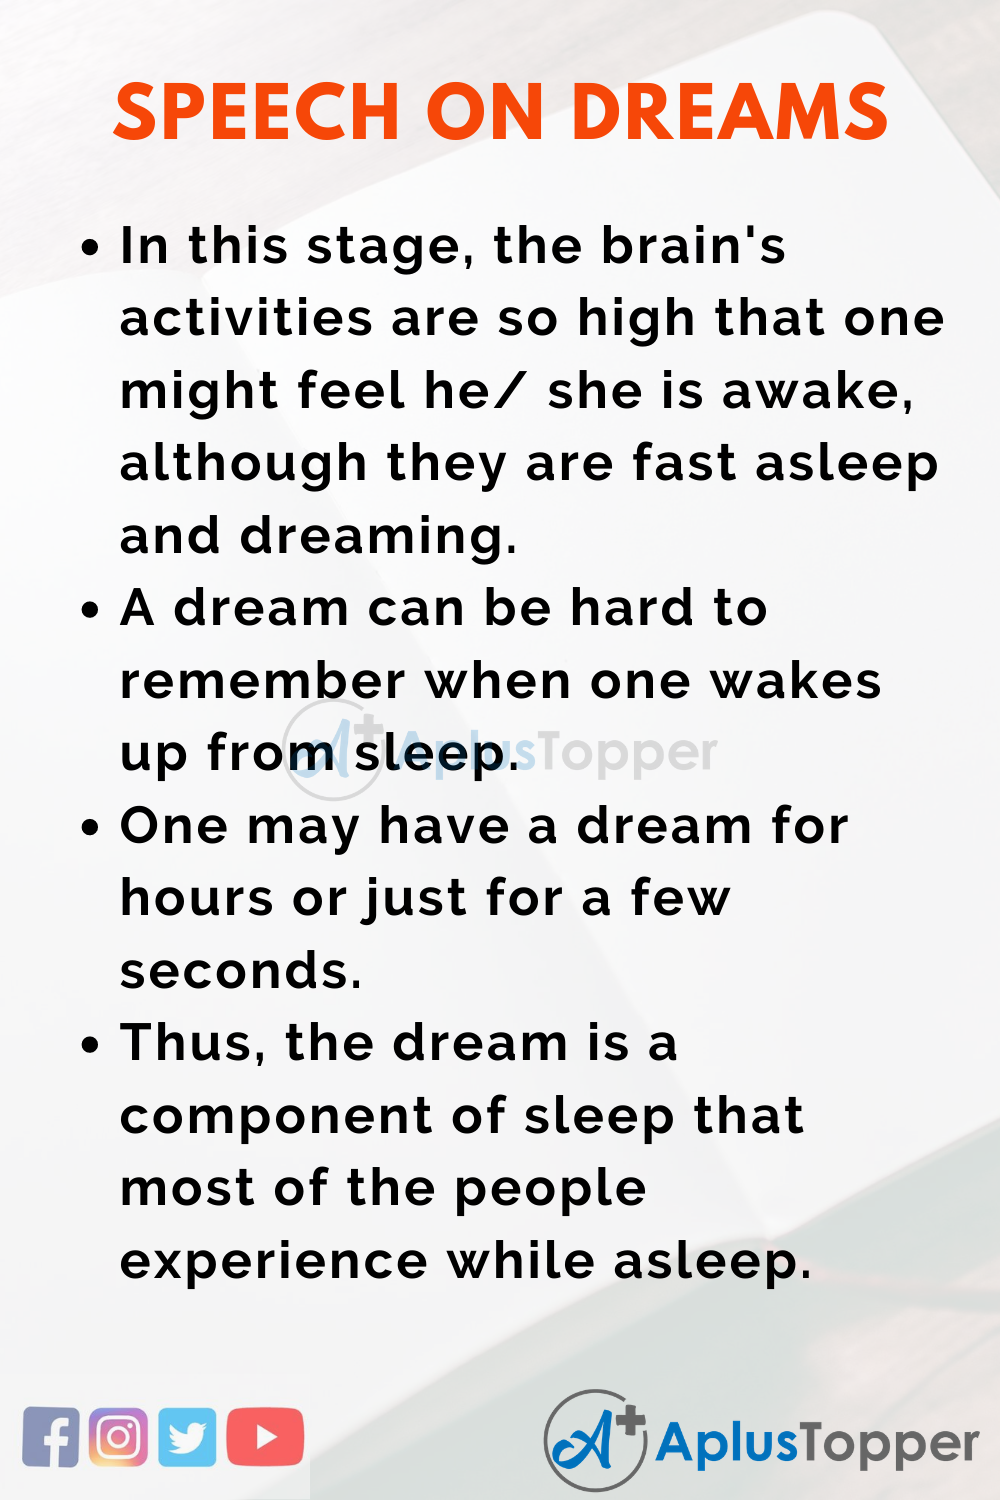 informative speech example about dreams